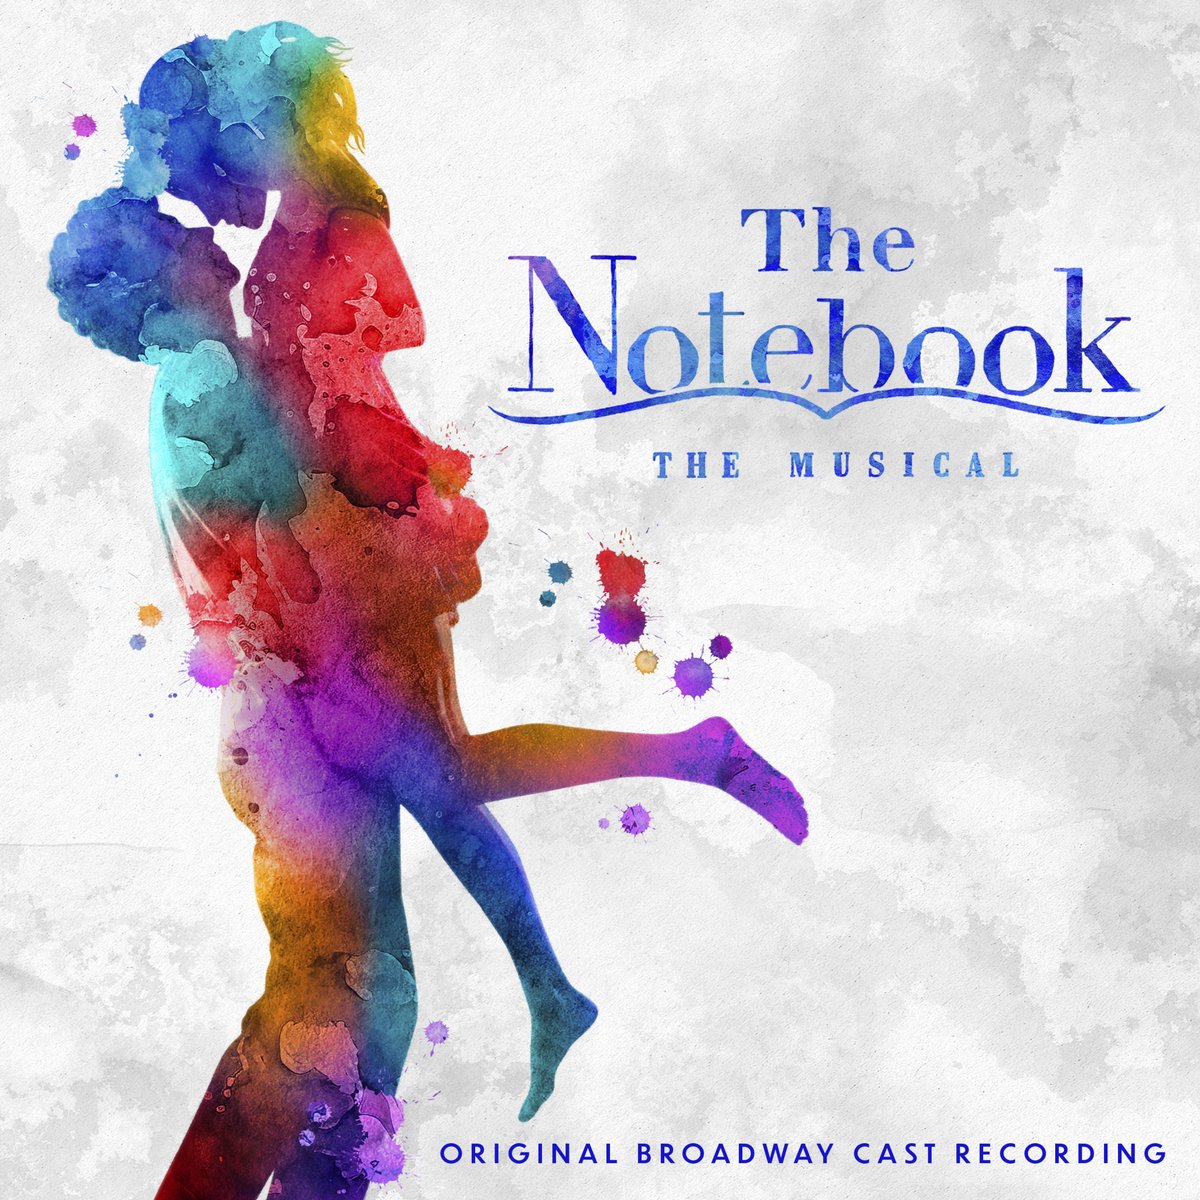 This IS love! 💙 Listen to the @NotebookMusical Original Broadway Cast Recording now! Listen here: thenotebook.lnk.to/OBCR